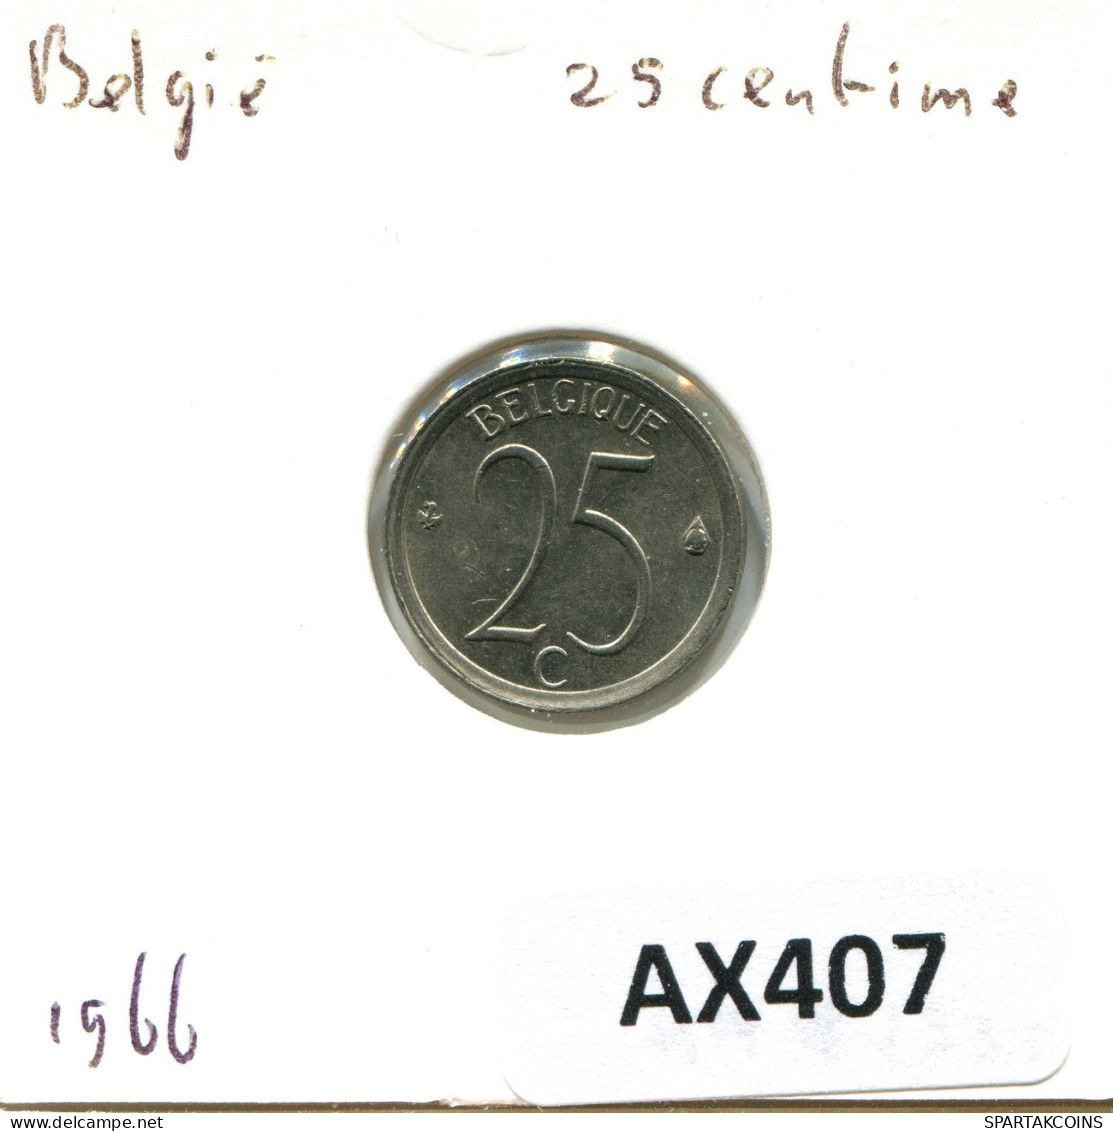 25 CENTIMES 1966 FRENCH Text BELGIUM Coin #AX407.U.A - 25 Centimes